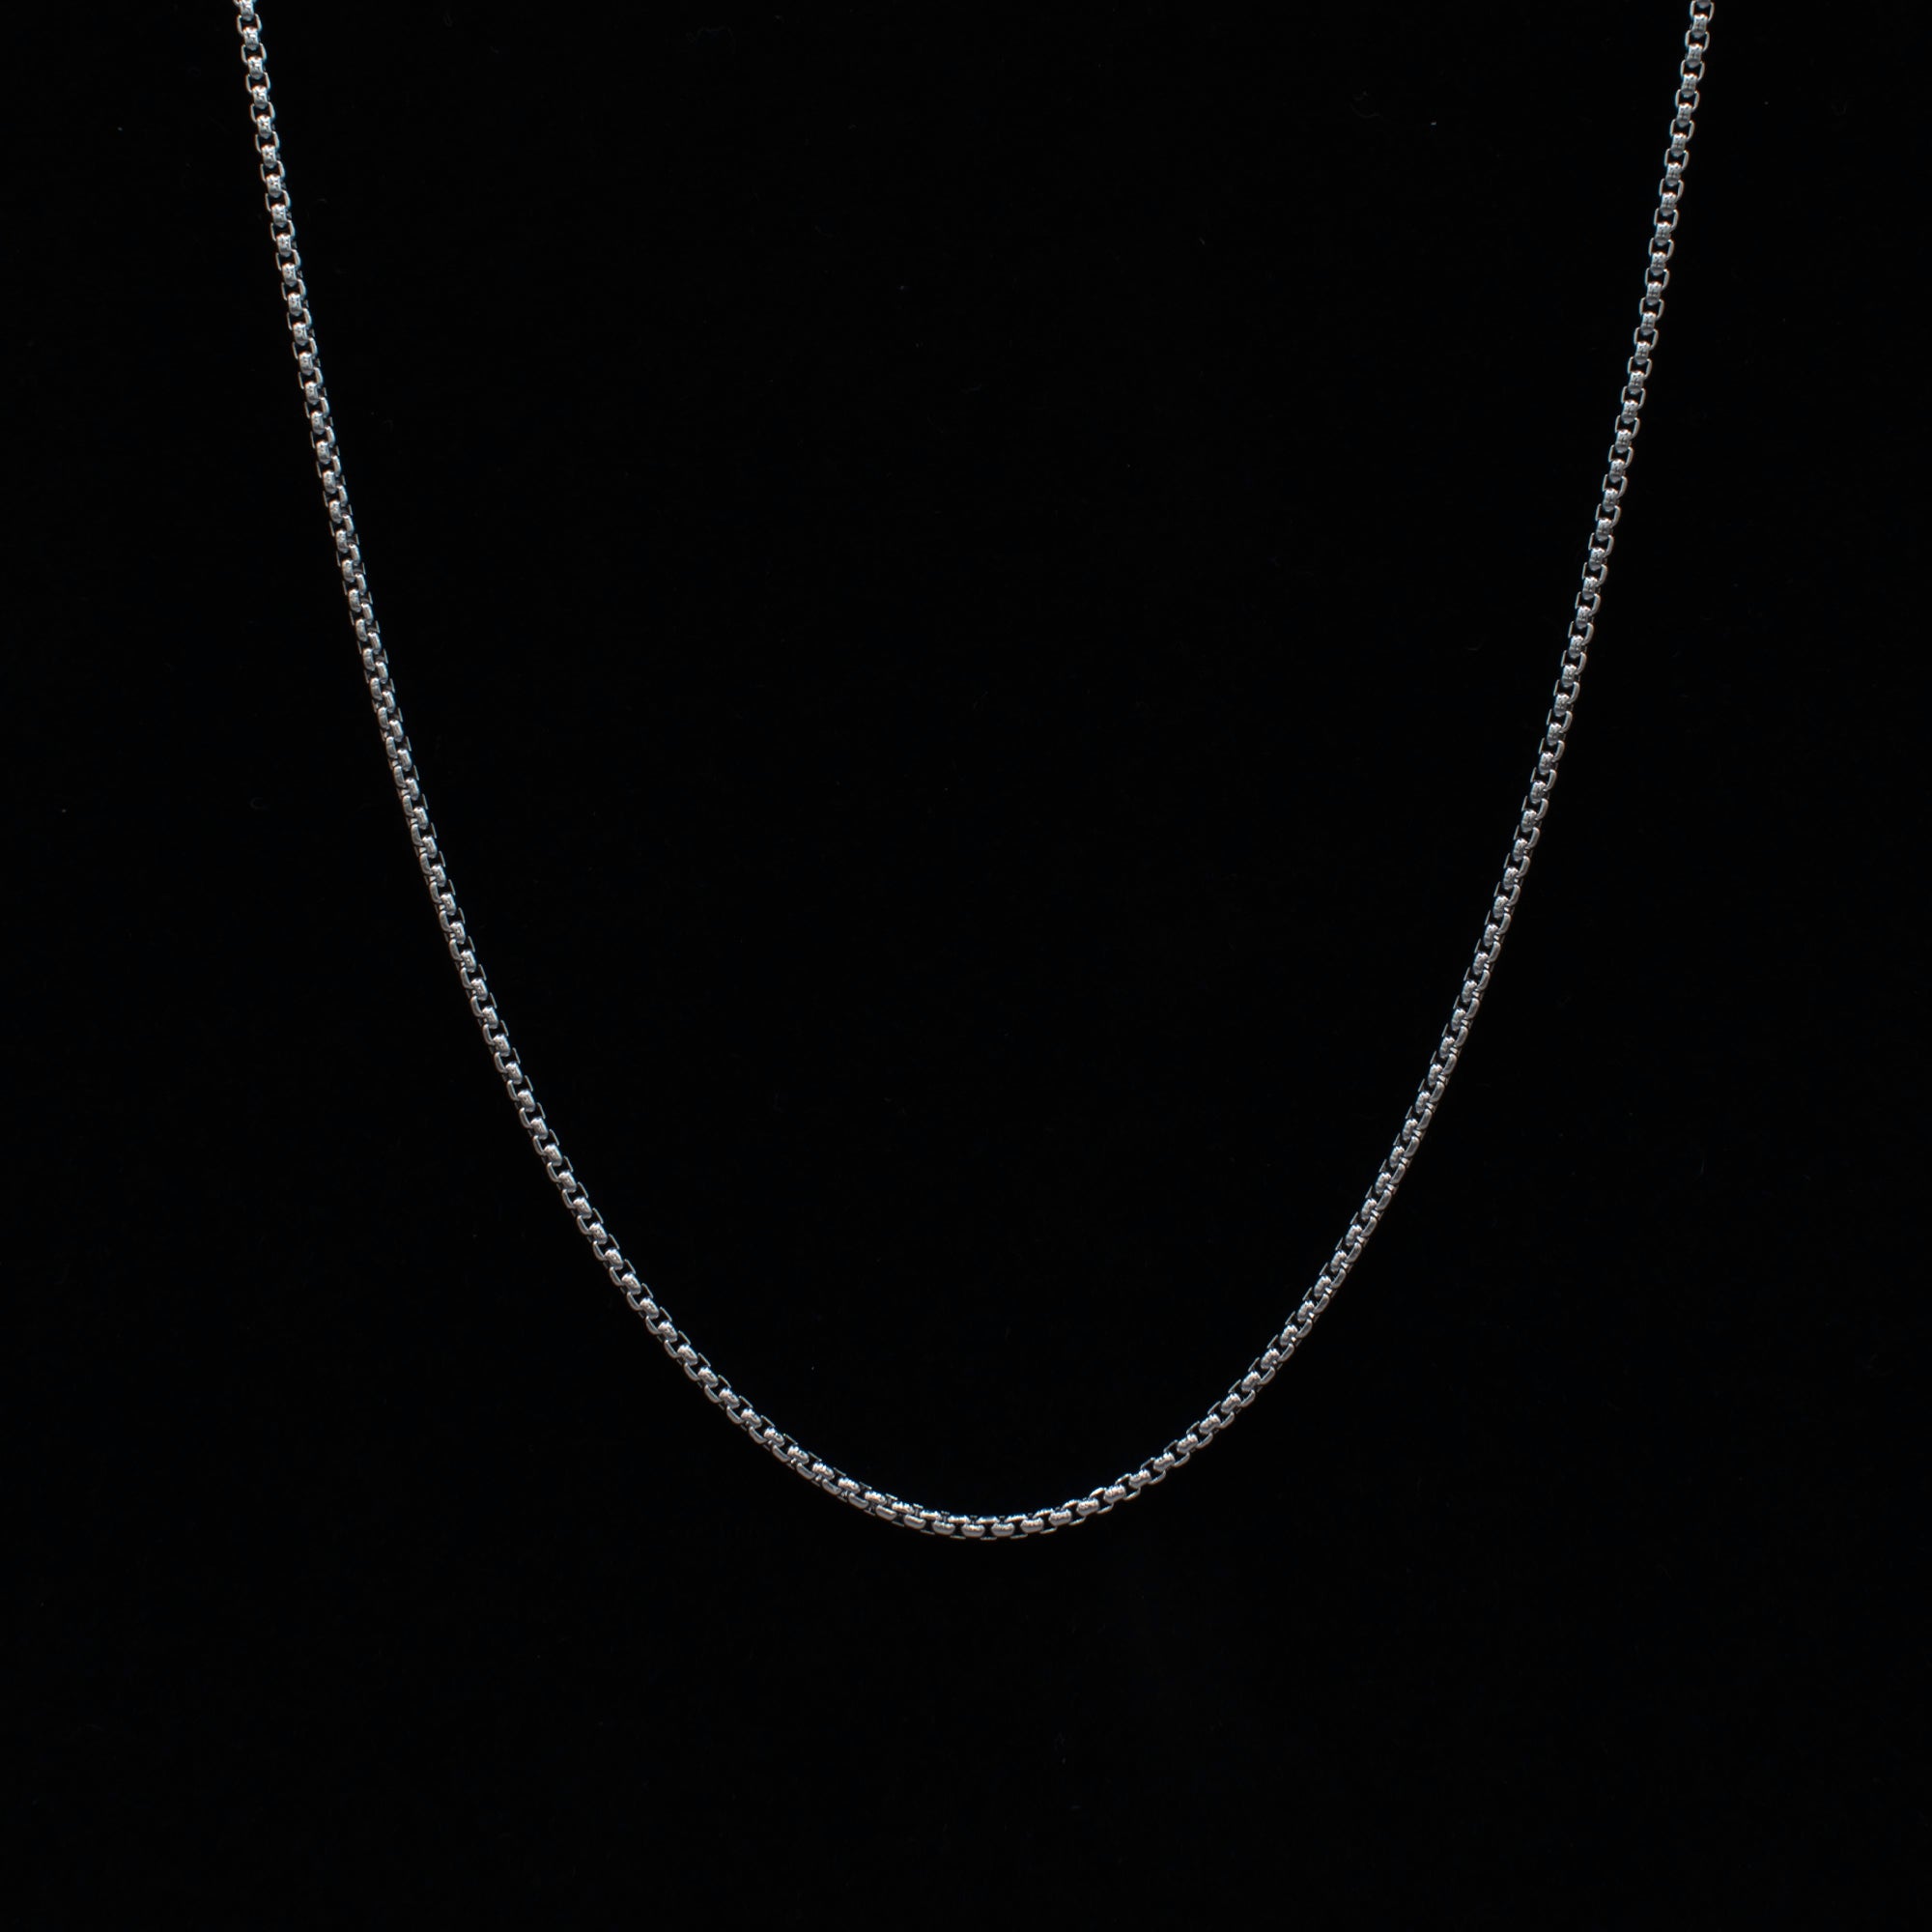 Silver Round Box Chain Necklace - 2mm